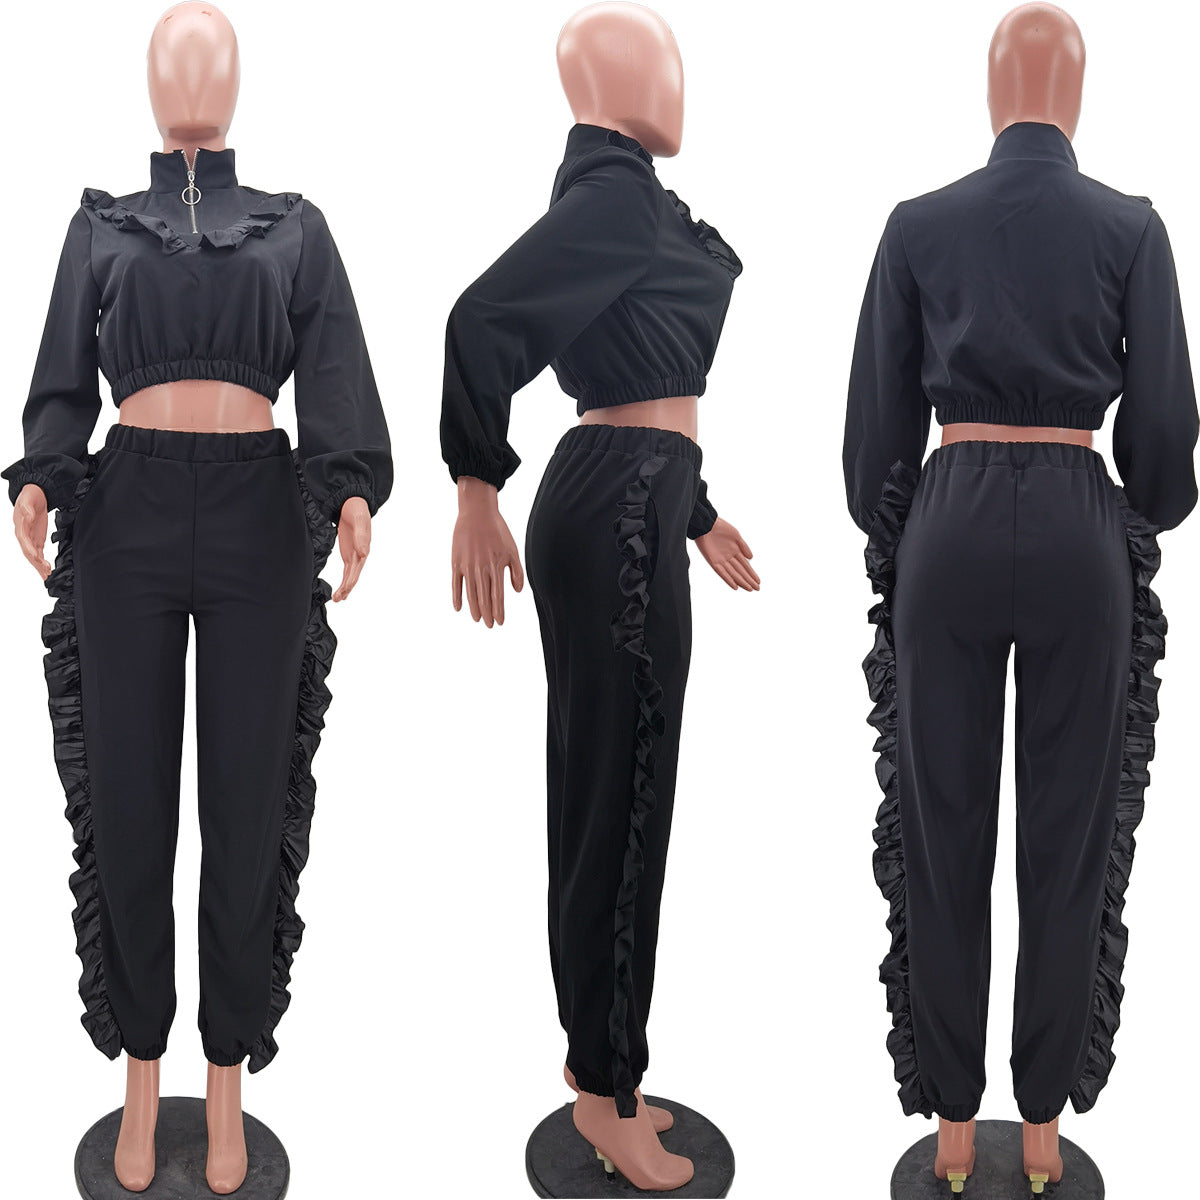 BamBam Trendy Women's Solid Color Zipper Ruffle Fashion Casual Sports Two Piece Pants Set - BamBam